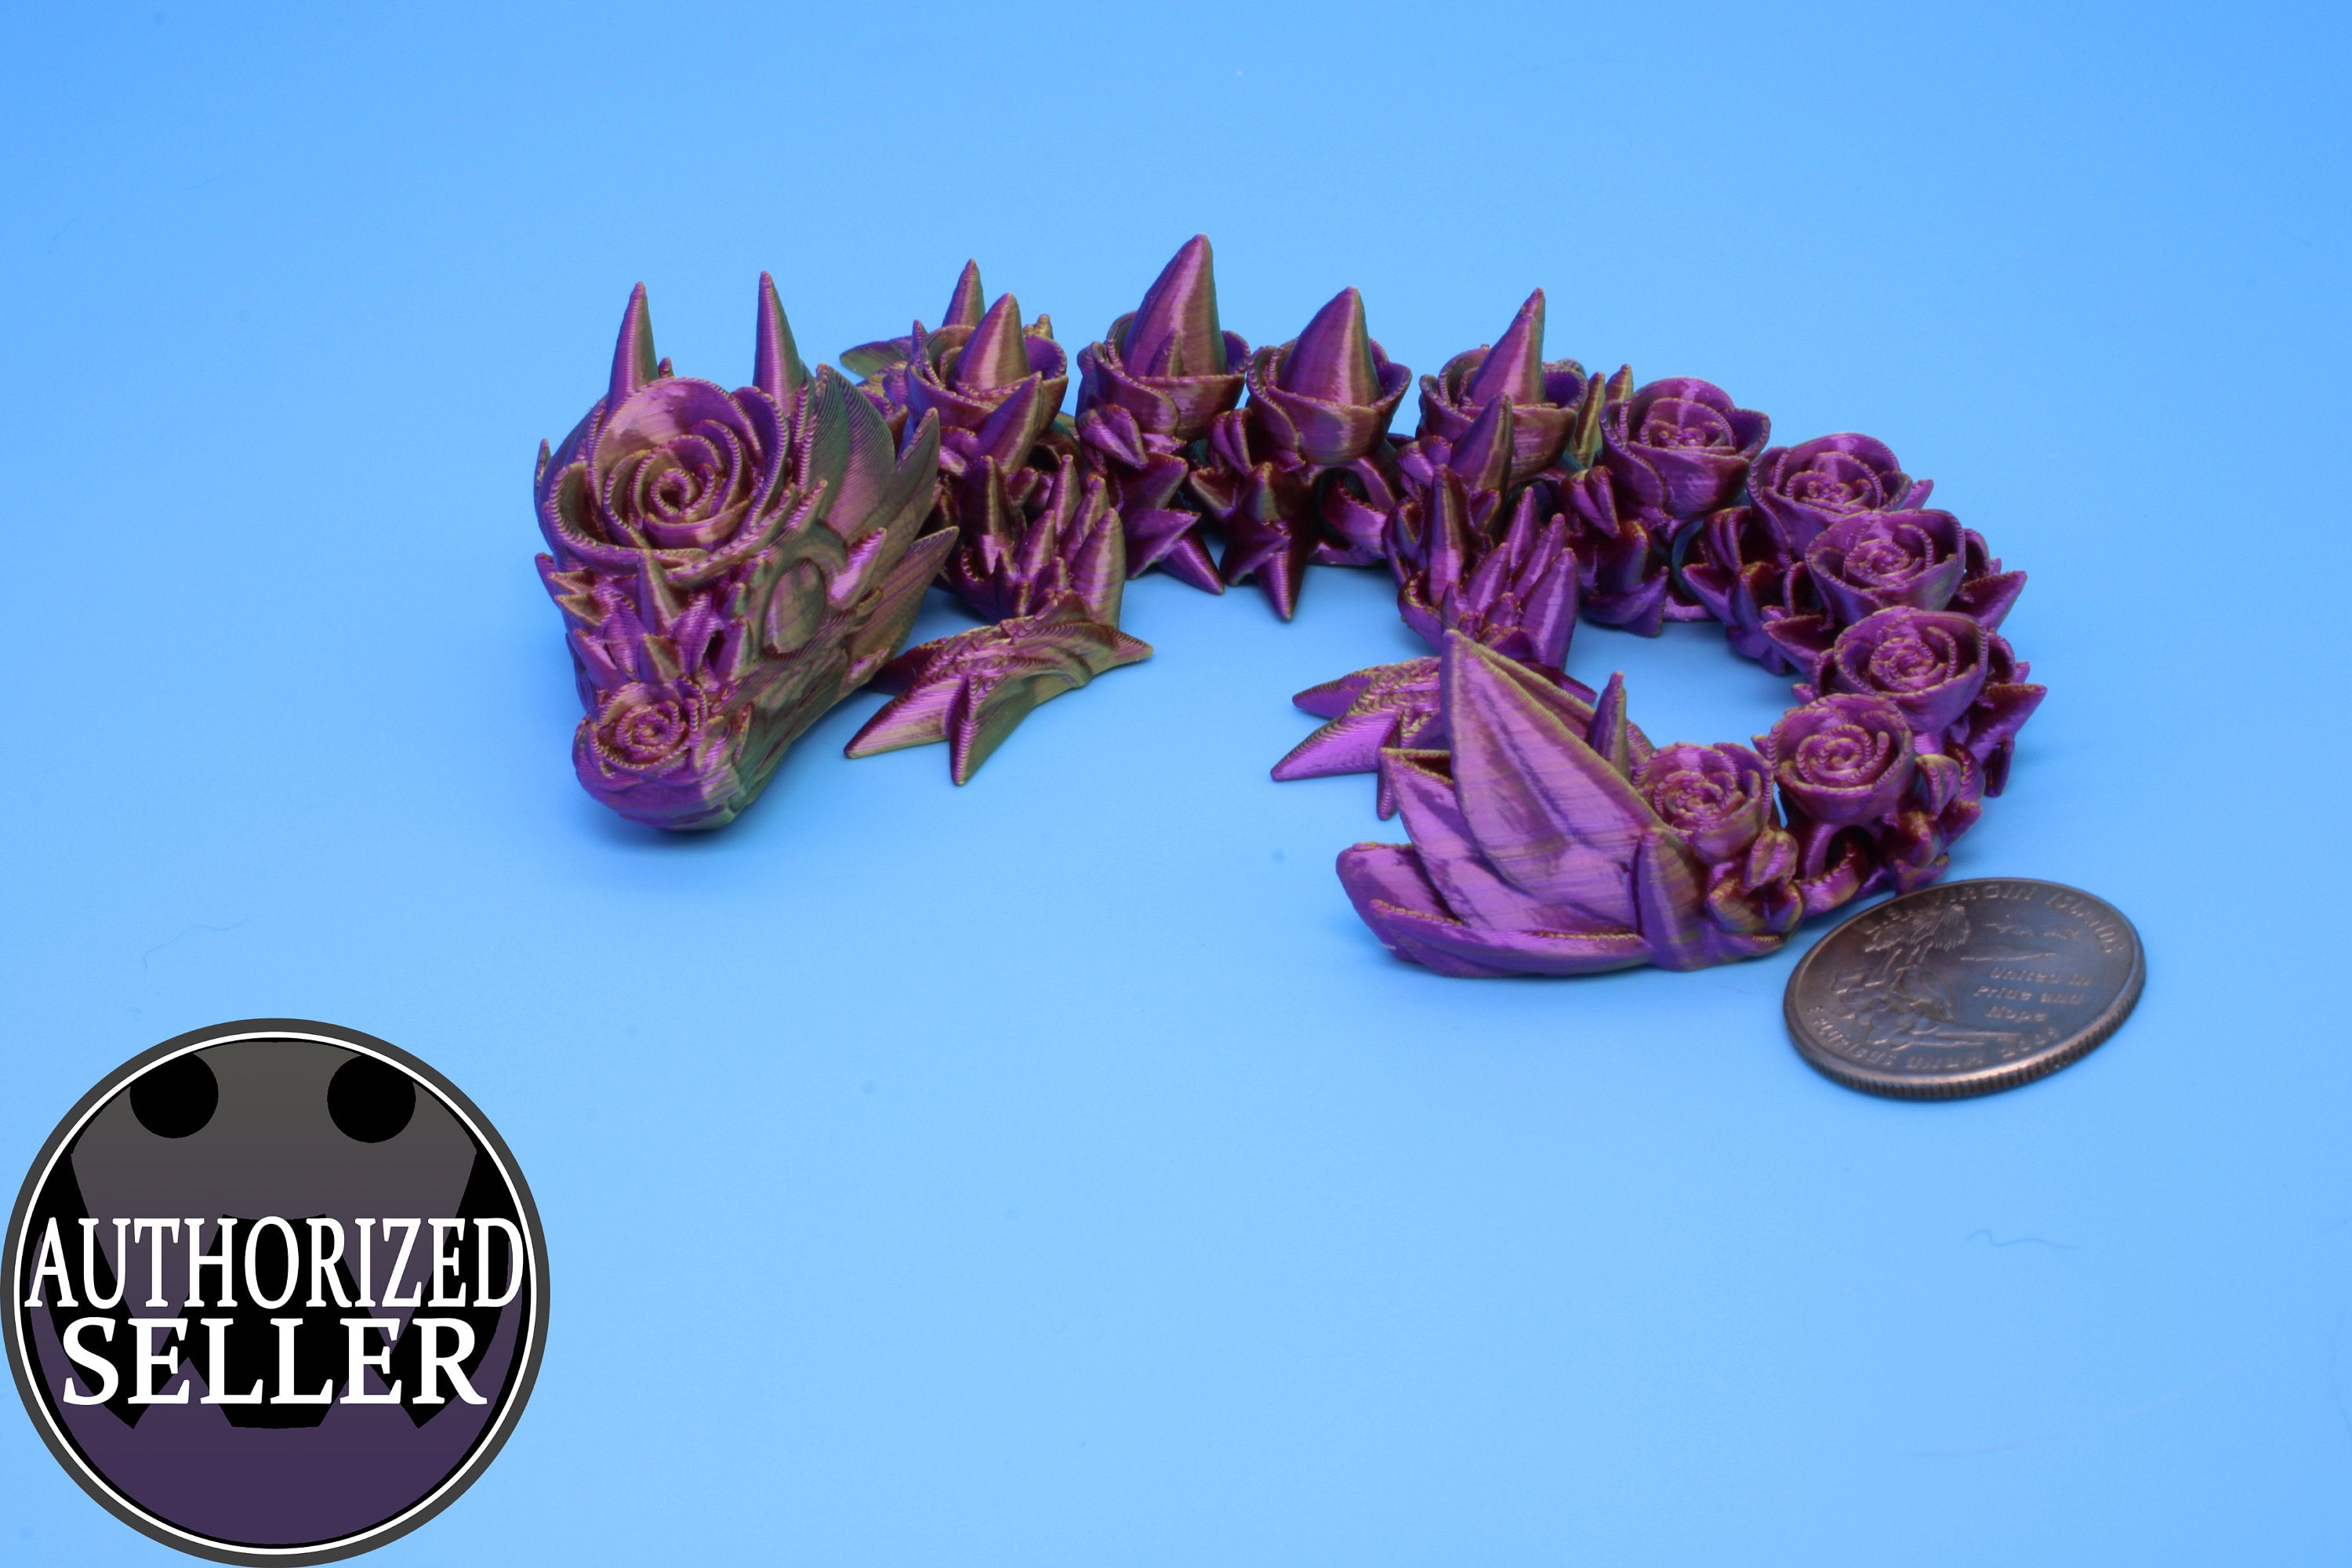 Baby Rose Dragon | Miniature | 3D Printed | Fidget | Flexi Toy 8.5 in. | Stress Relief Gift